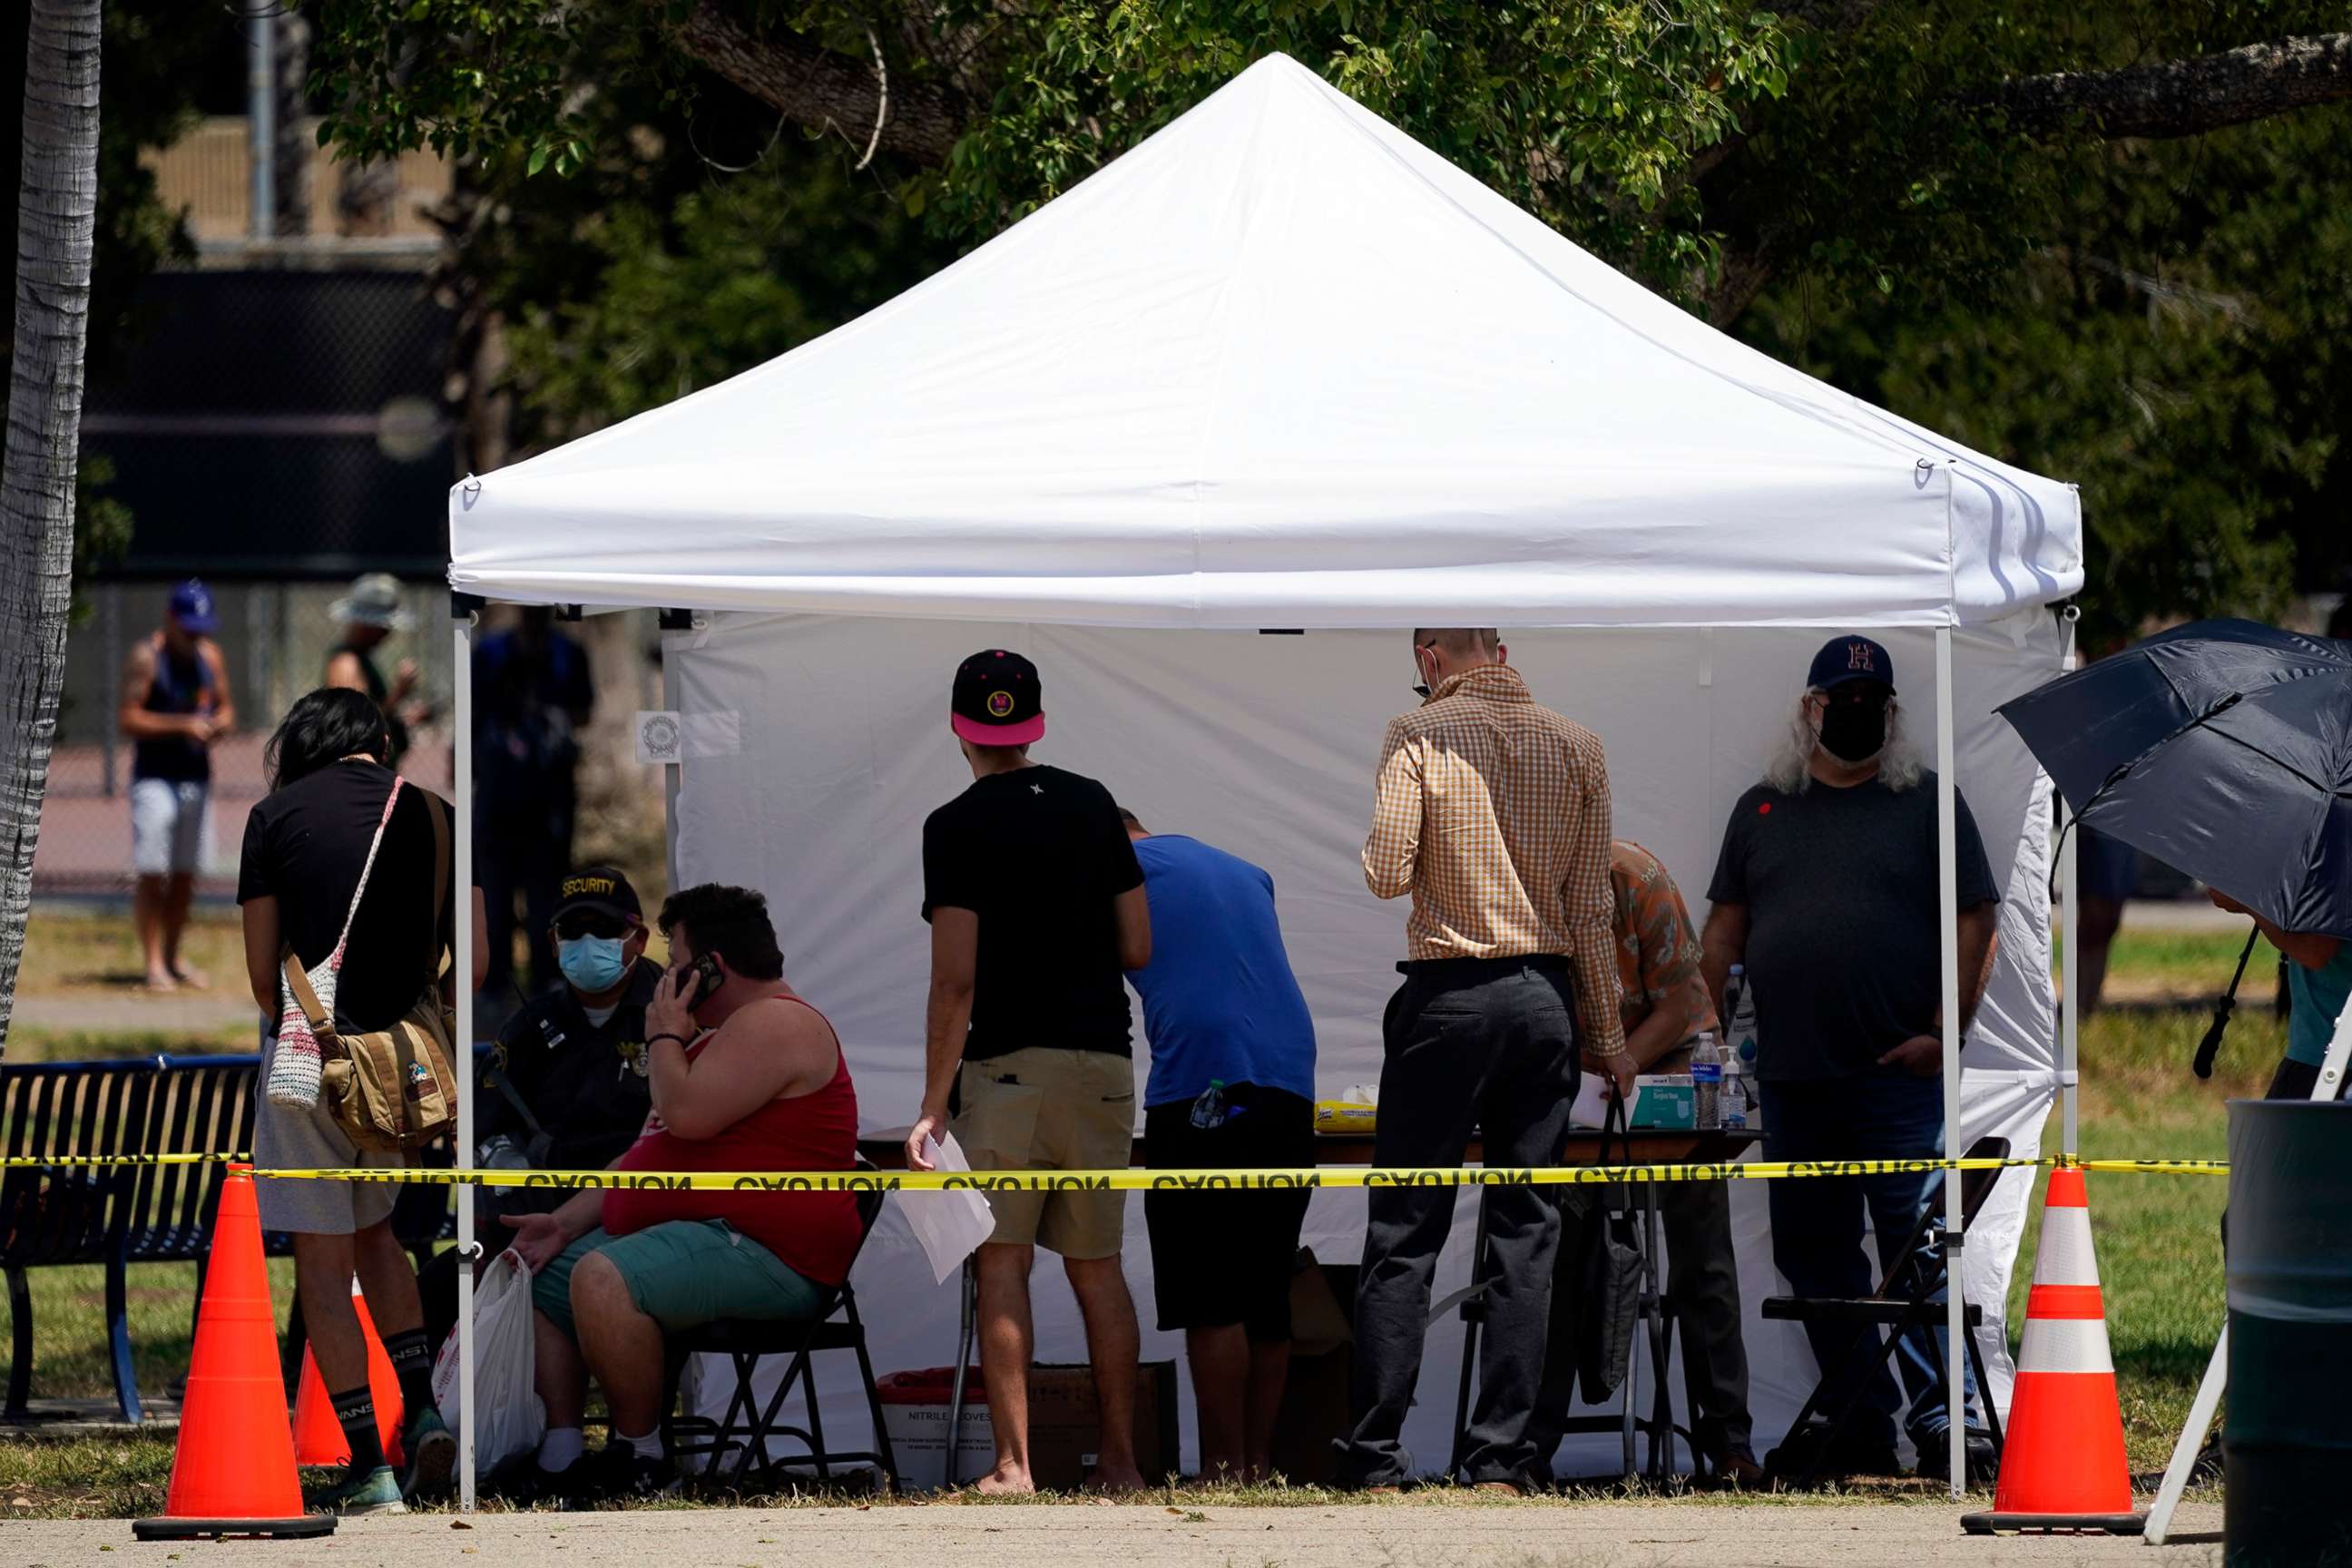 PHOTO: People line up at a monkeypox vaccination site, July 28, 2022, in Encino, Calif.